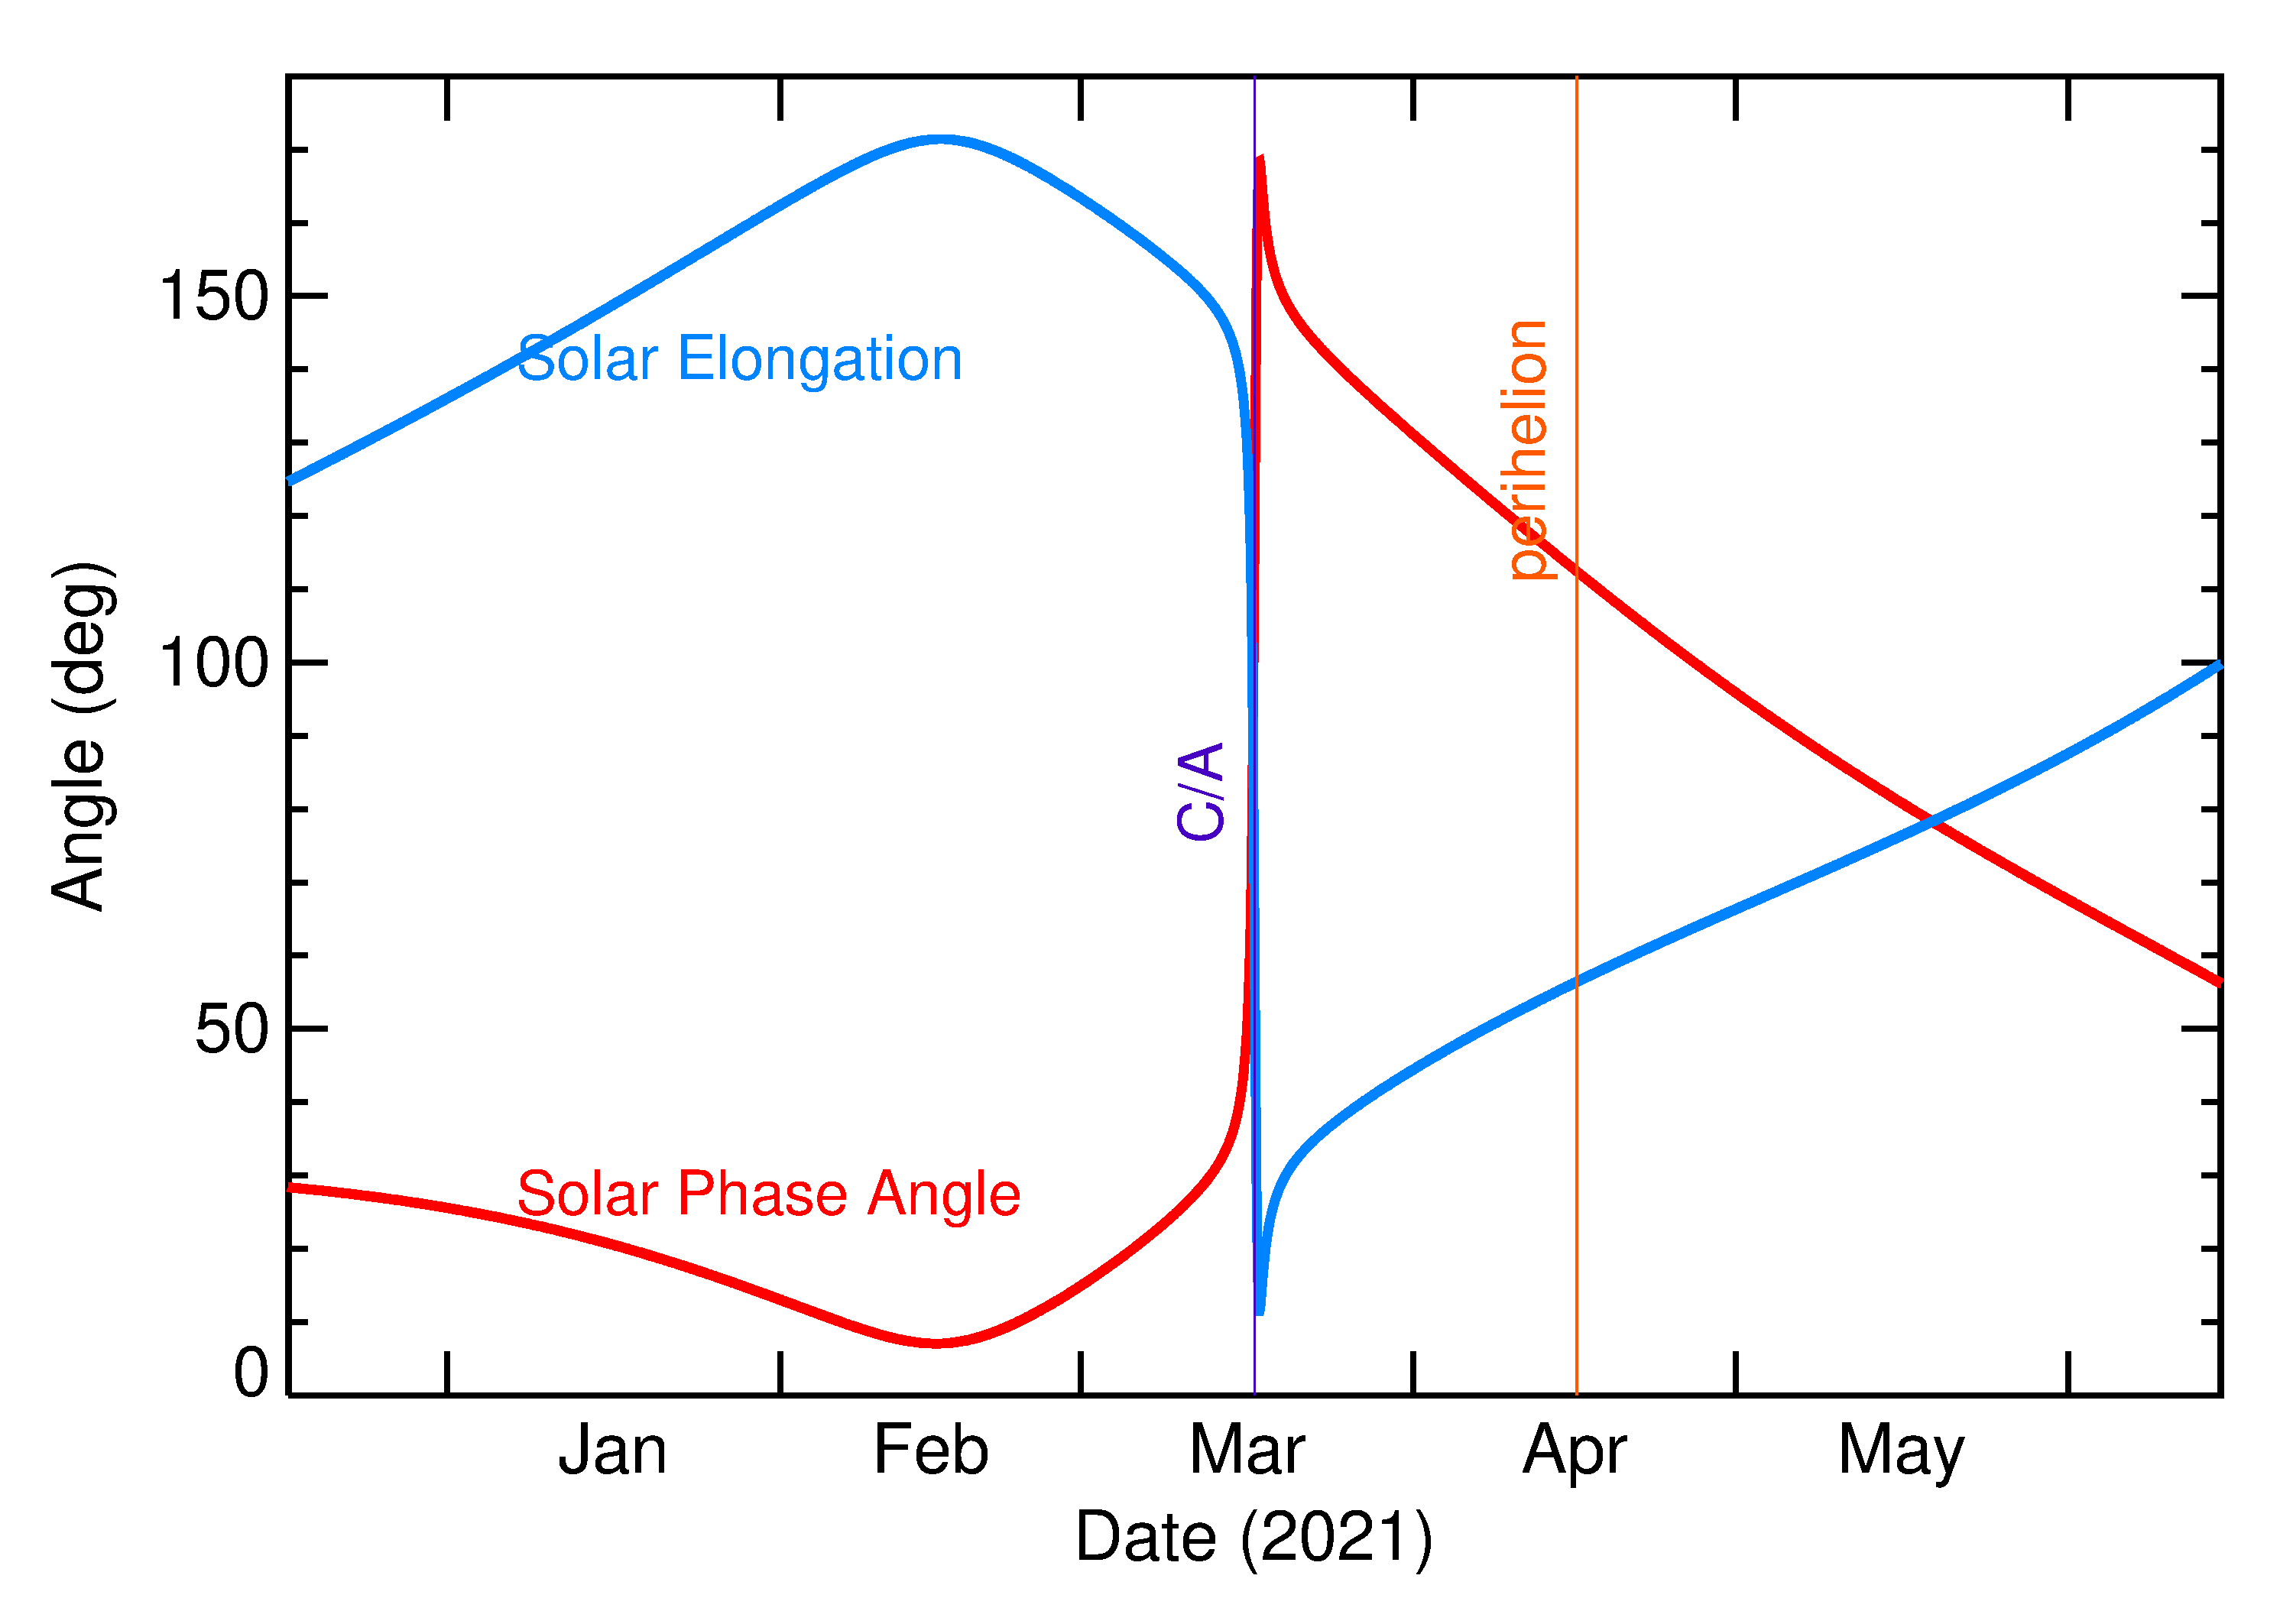 Solar Elongation and Solar Phase Angle of 2021 EQ3 in the months around closest approach